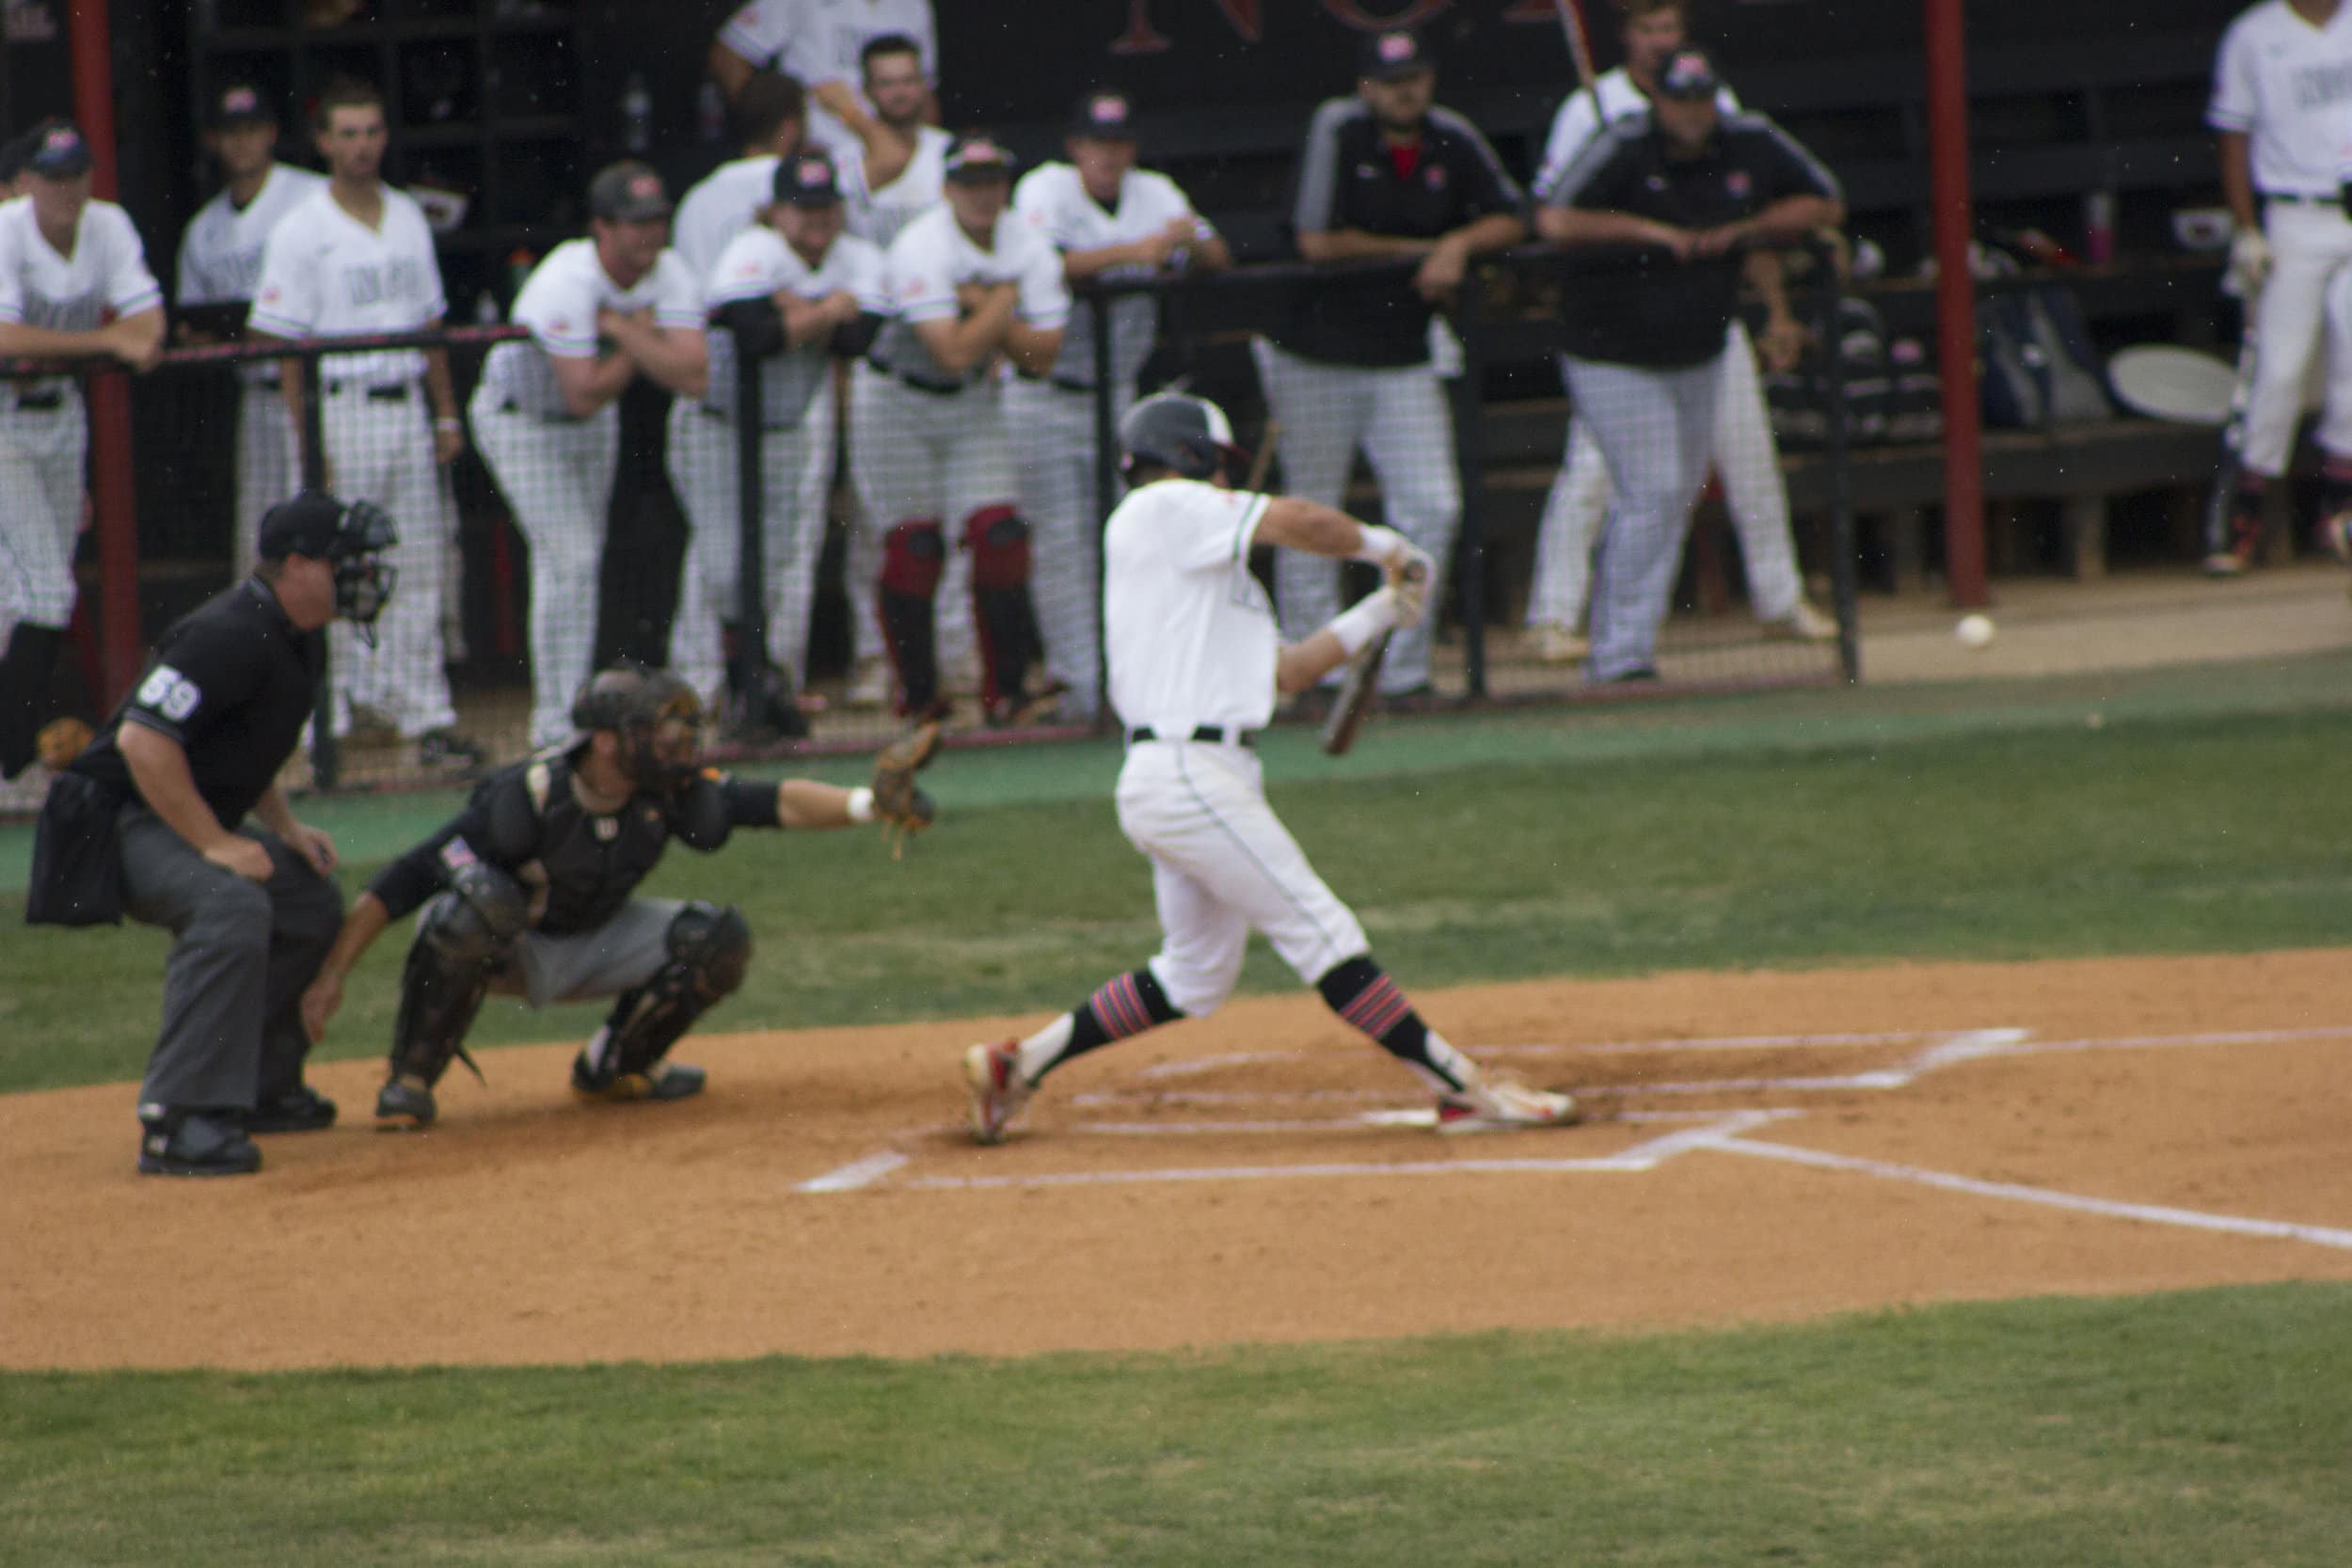 Ryan Brown, at bat, seeks to get on base with a base hit.